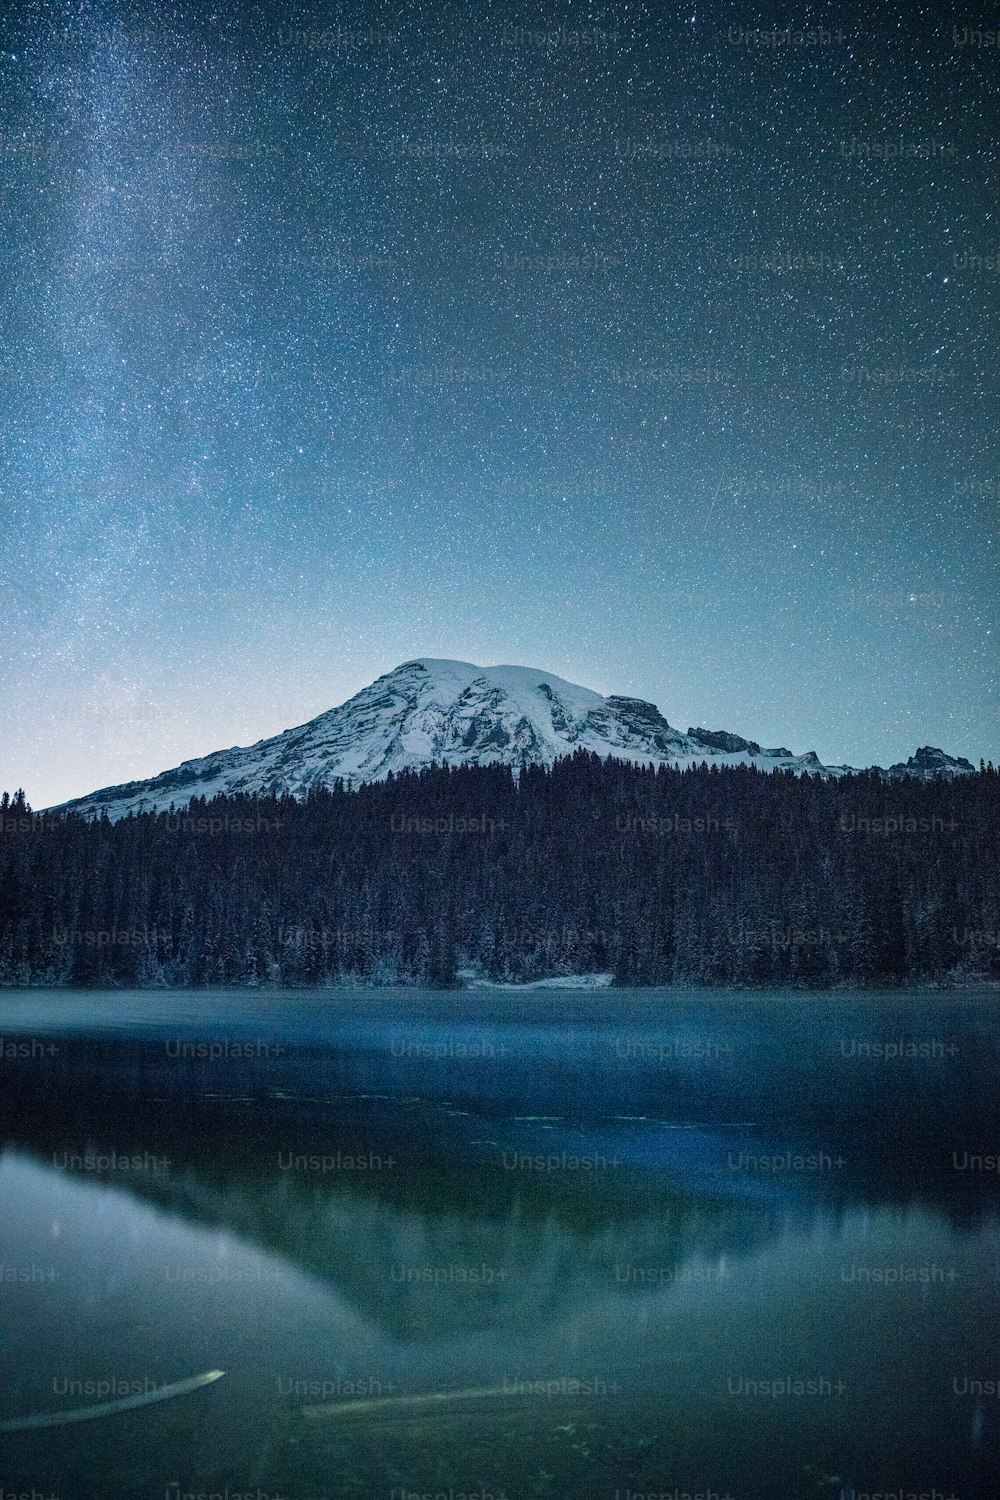 a mountain with a lake in front of it under a night sky